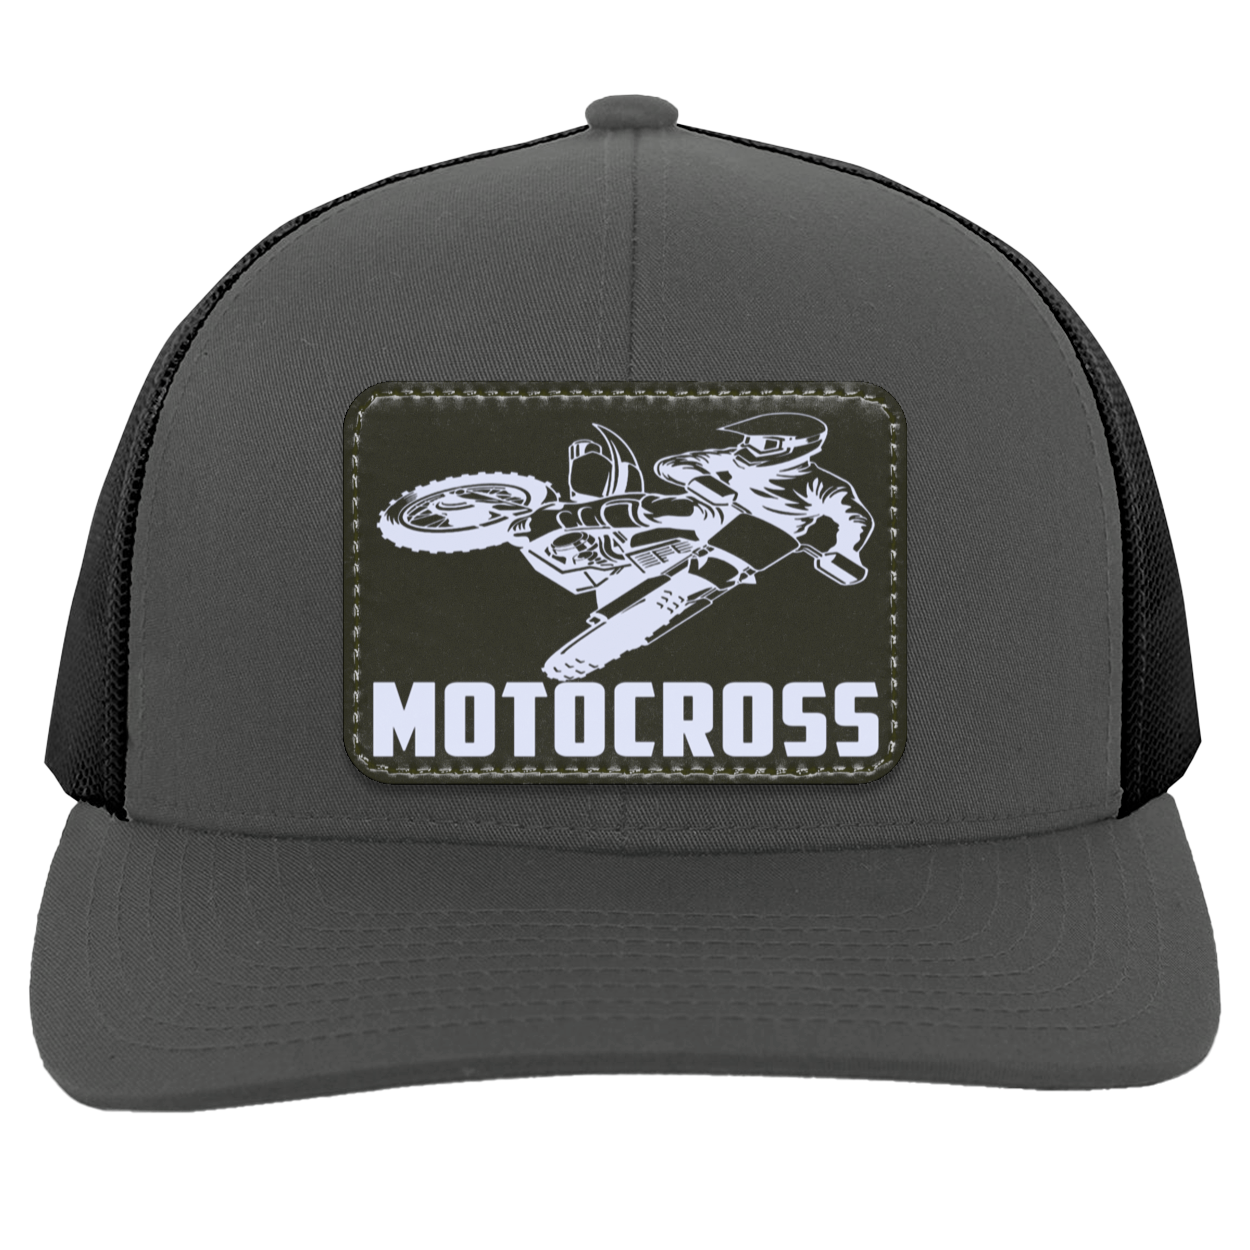 Motocross Trucker Patched Snap Back